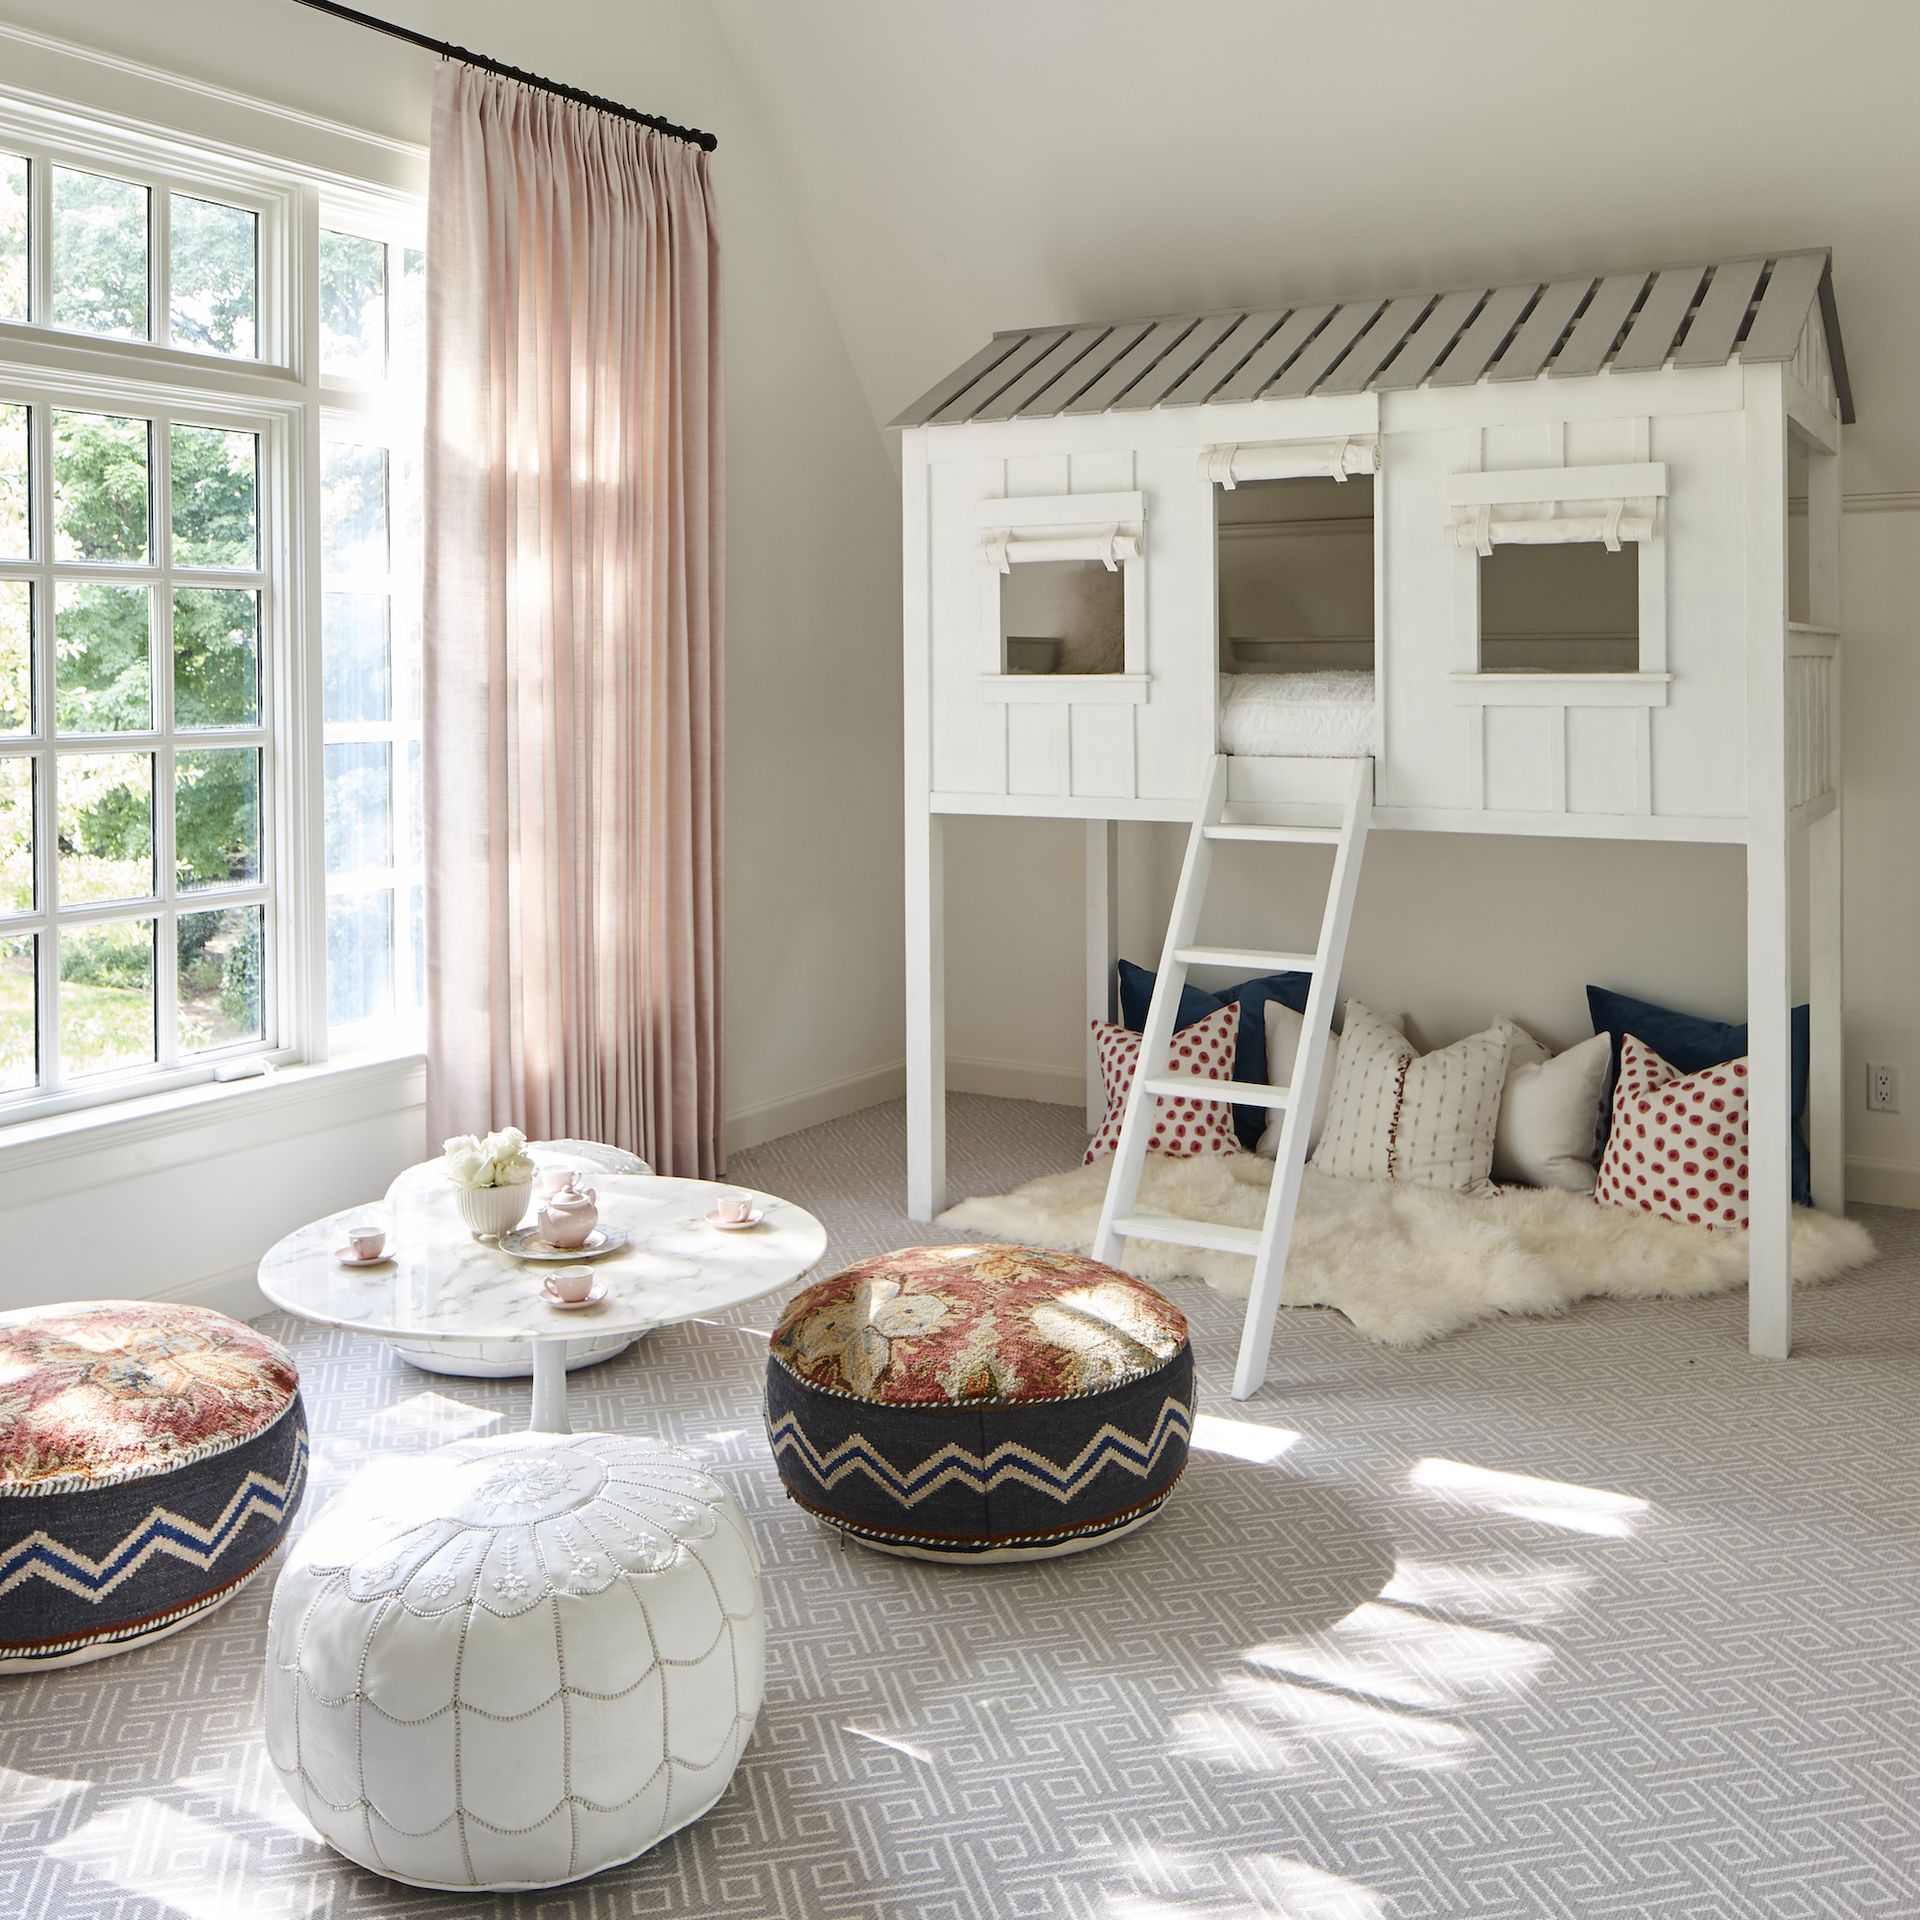 <p>                     'Kids of all ages want to feel something a bit magical, which usually means a feature that feels unique to them. For example, a tucked-away reading nook or a whimsical play table and seating arrangement – the design must excite them!' says Mel Bean, founder and lead designer at Mel Bean Interiors.                   </p>